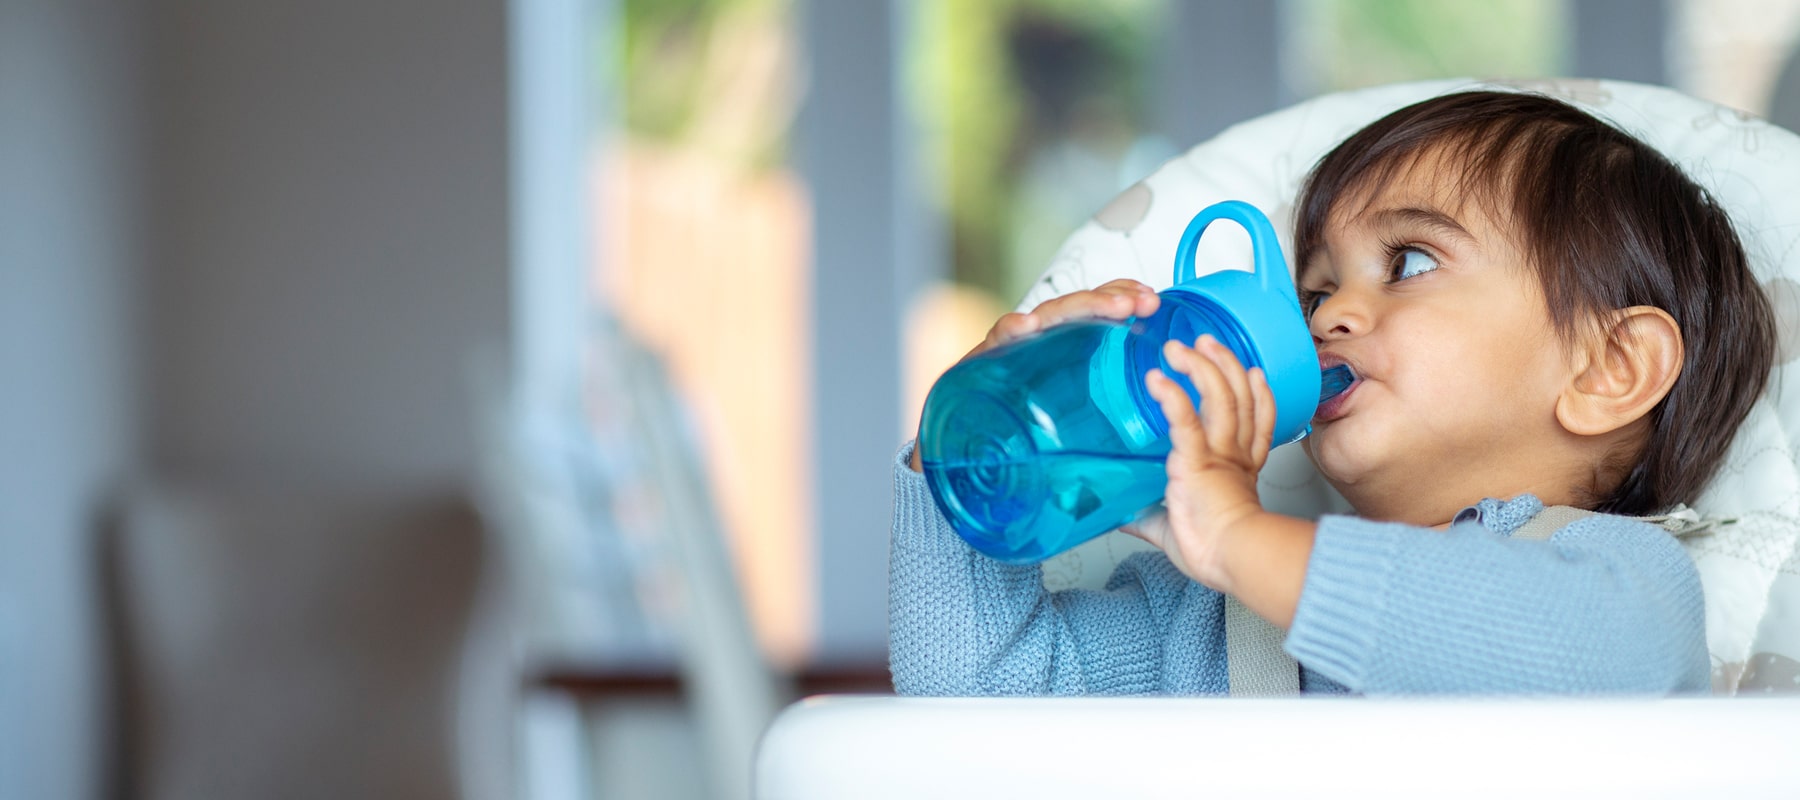 Child drinking vapor distilled water from a sippy cup